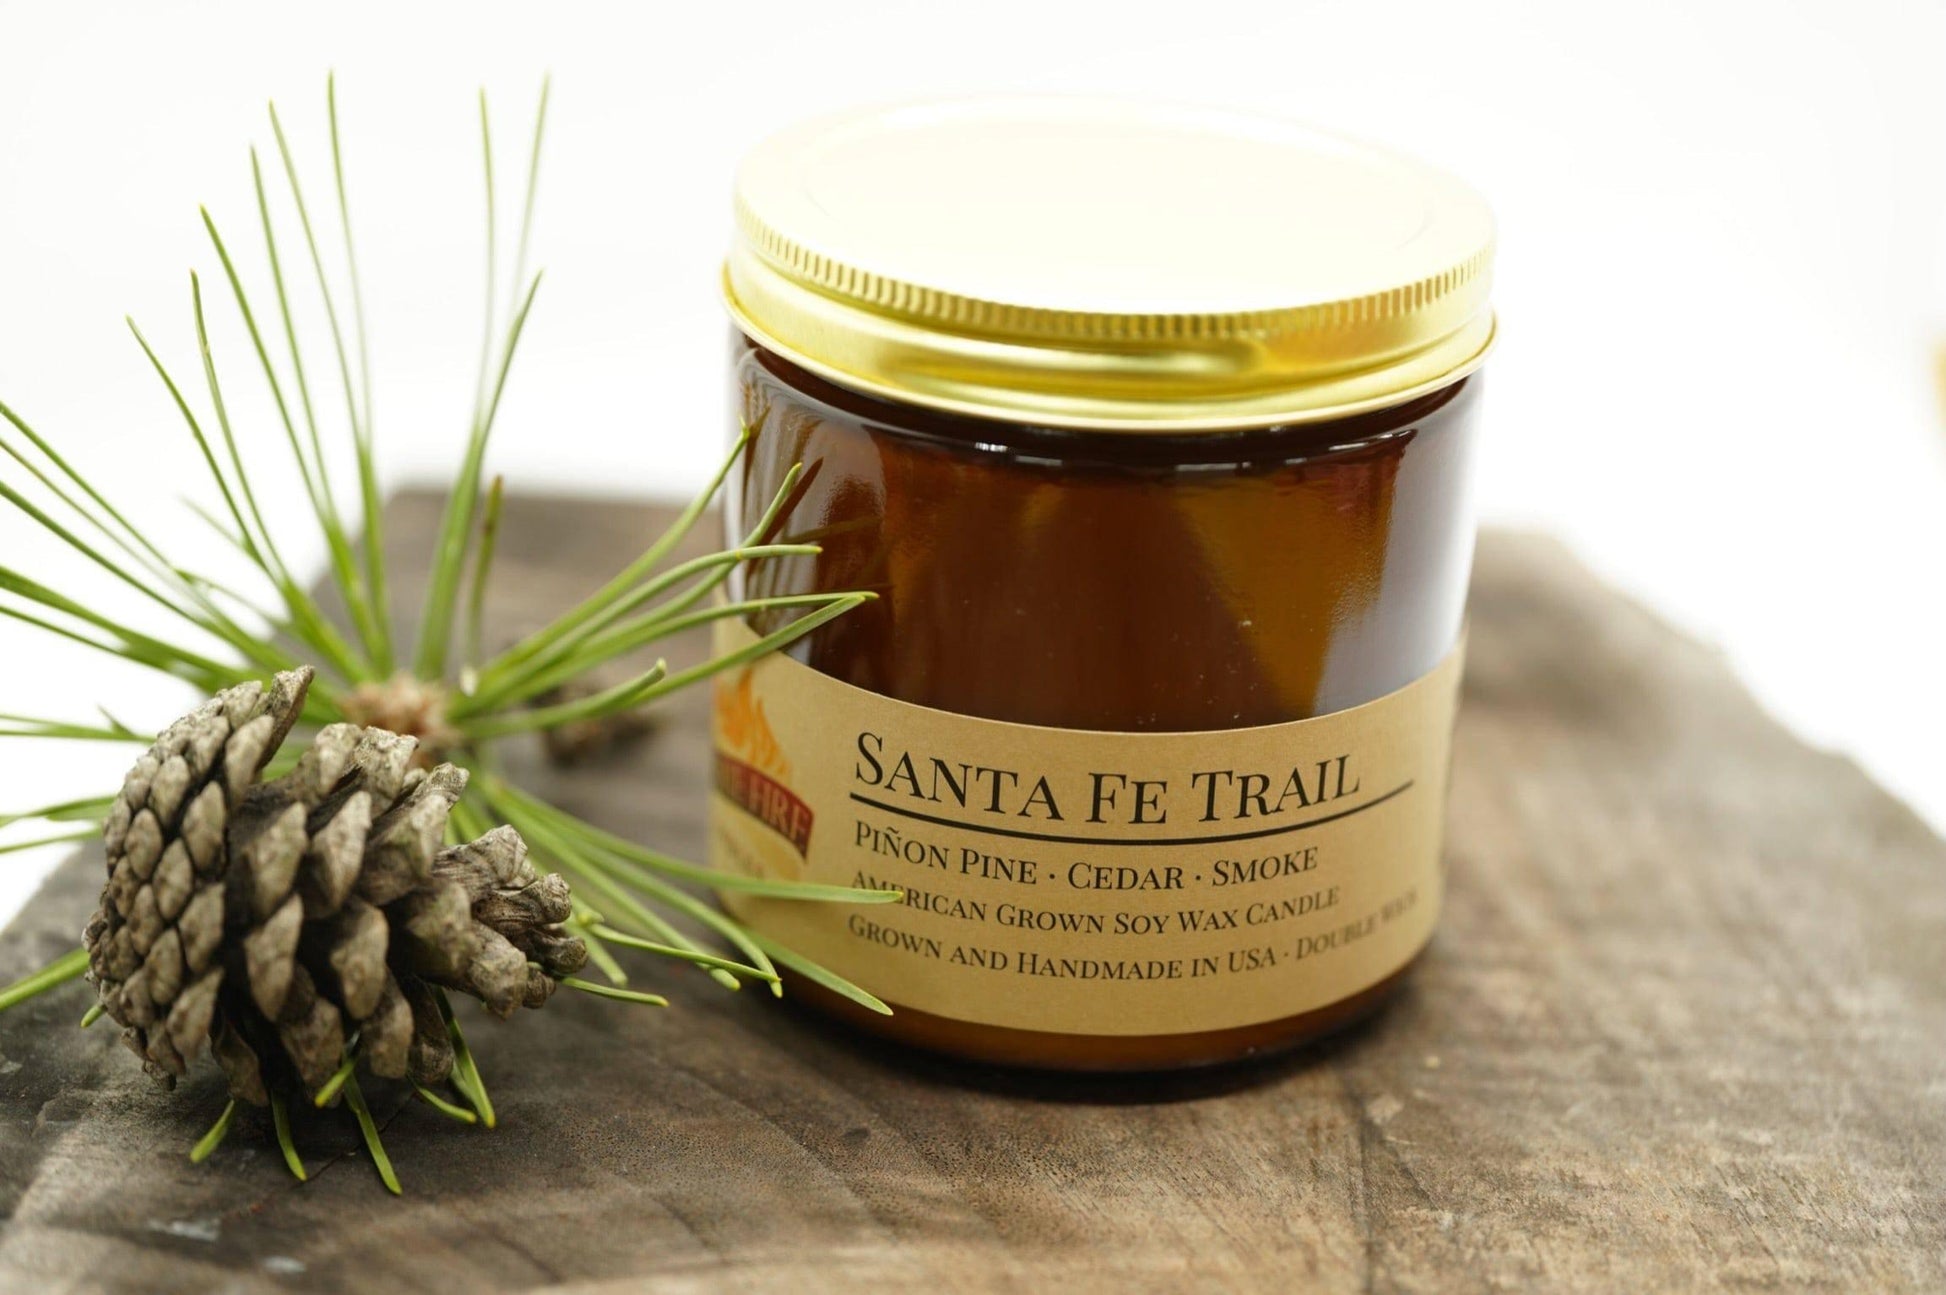 Santa Fe Trail Soy Wax Candle | 16 oz Double Wick Amber Apothecary Jar - Prairie Fire Candles